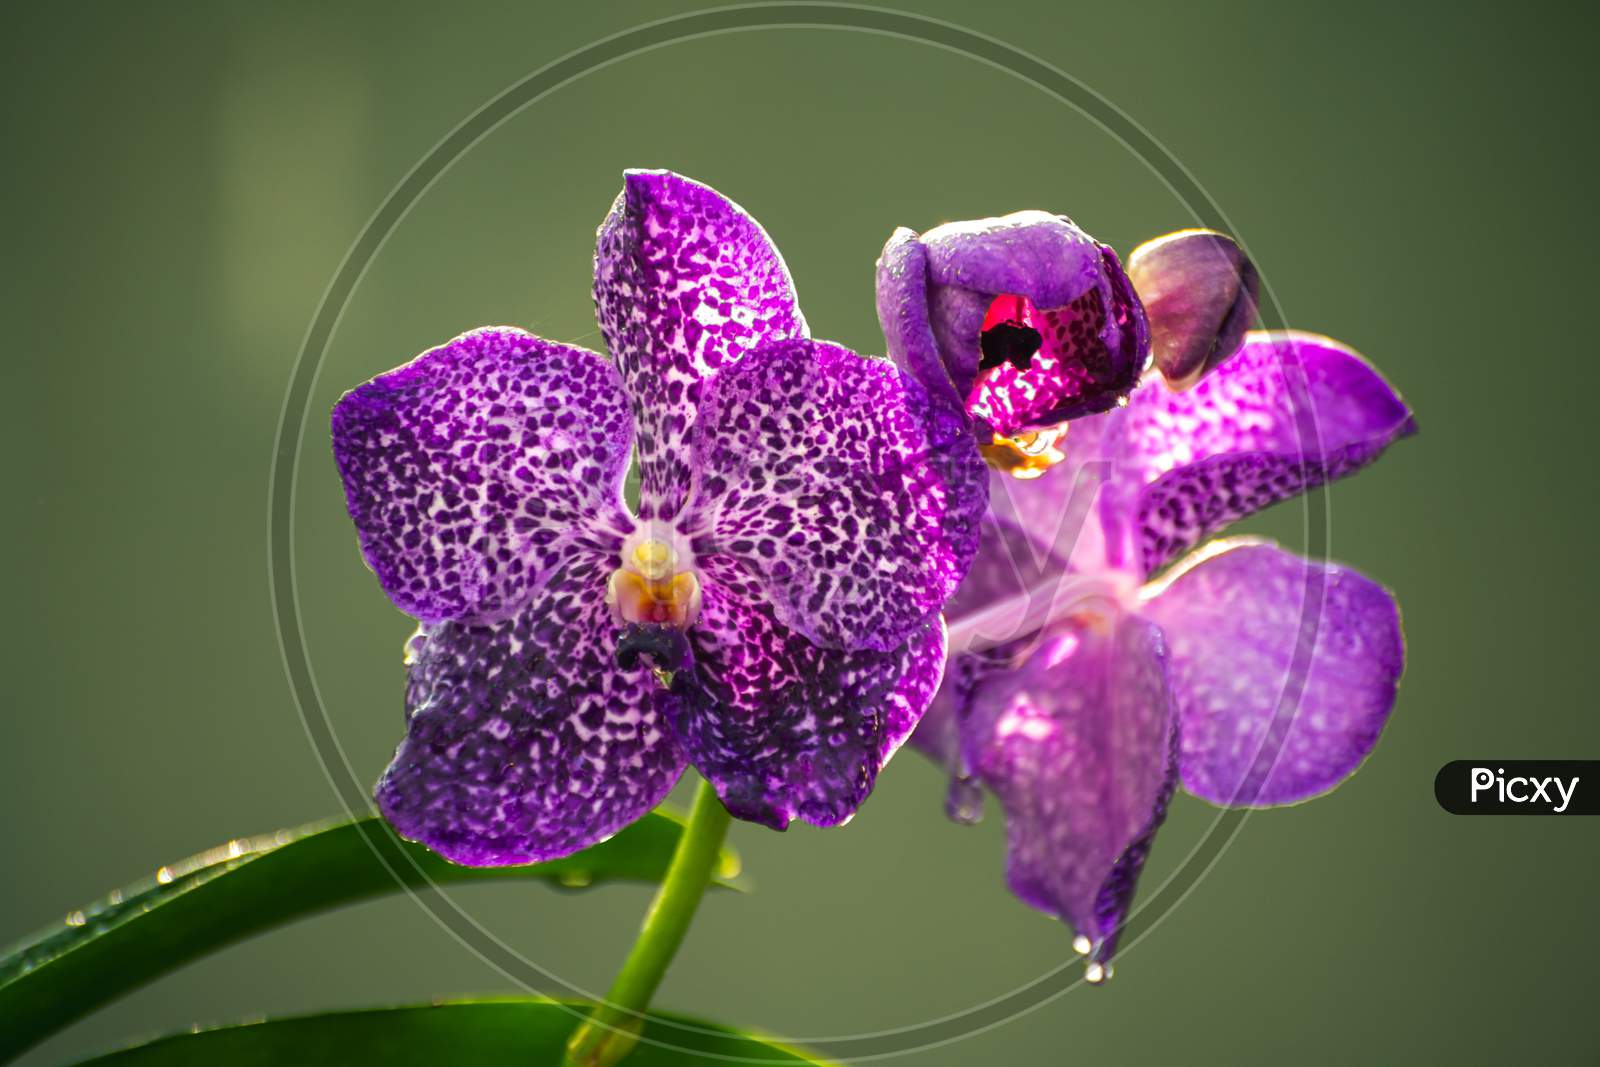 Purple Orchid Flowers Close Up Photo, Morning Dew In The Large Petals Against Soft Yellowish Bokeh Background,